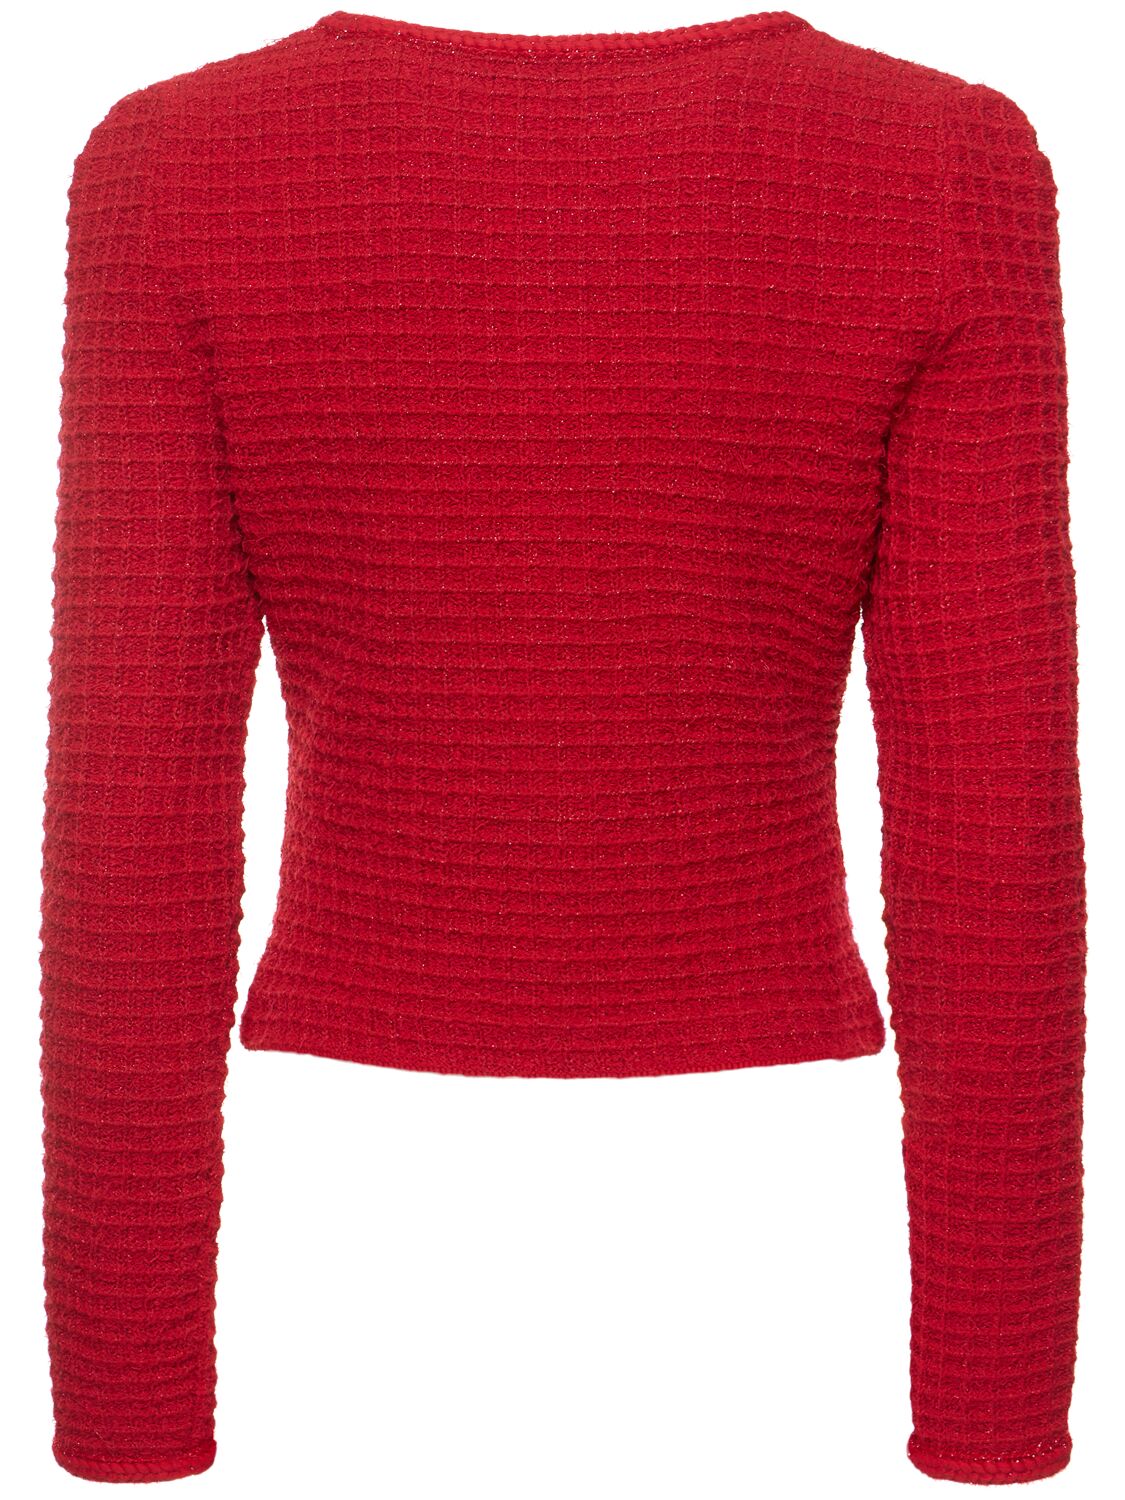 Shop Self-portrait Cotton Blend Knit Top W/bow In Red